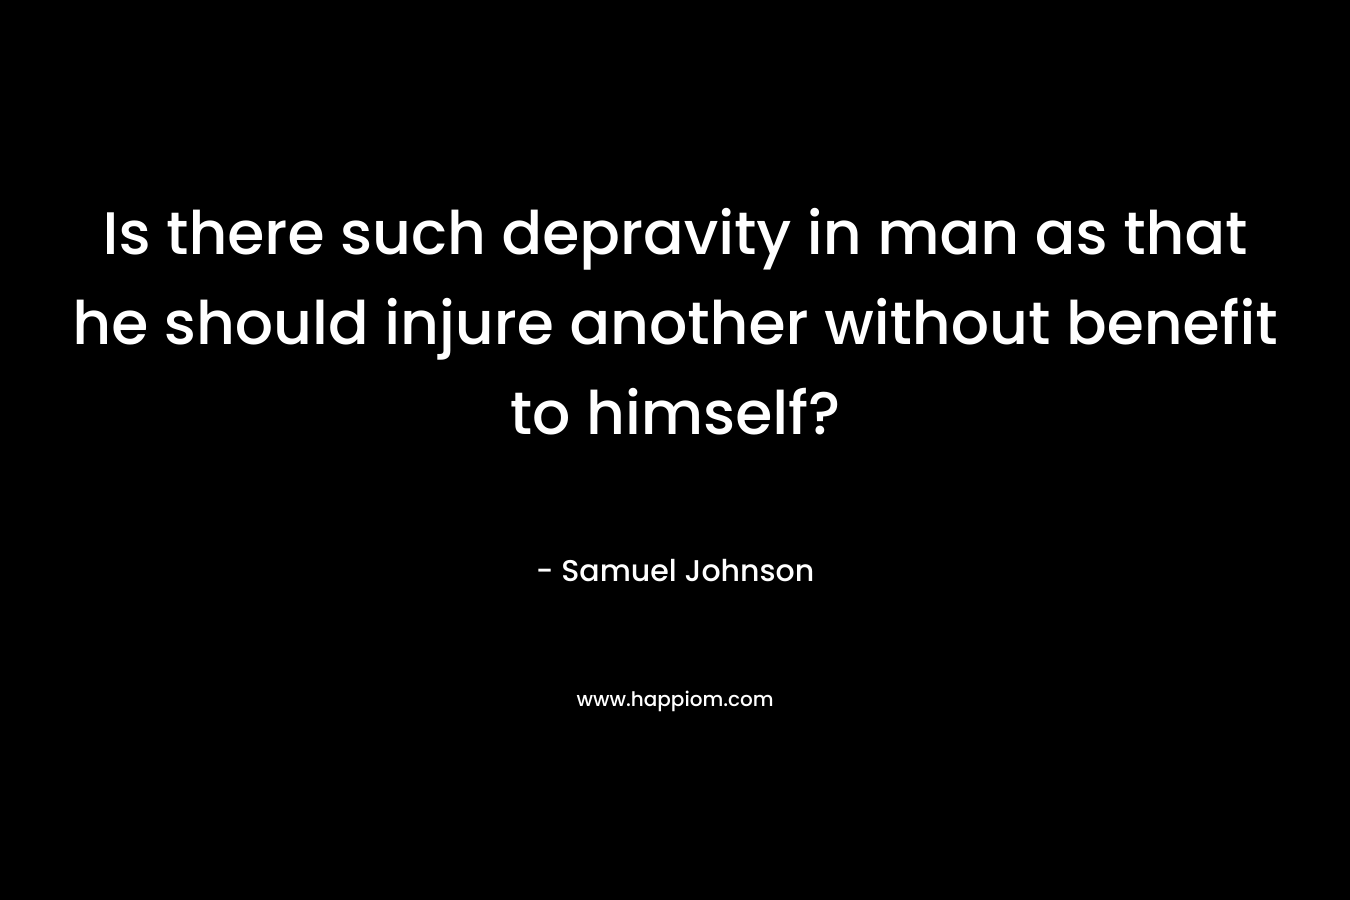 Is there such depravity in man as that he should injure another without benefit to himself?